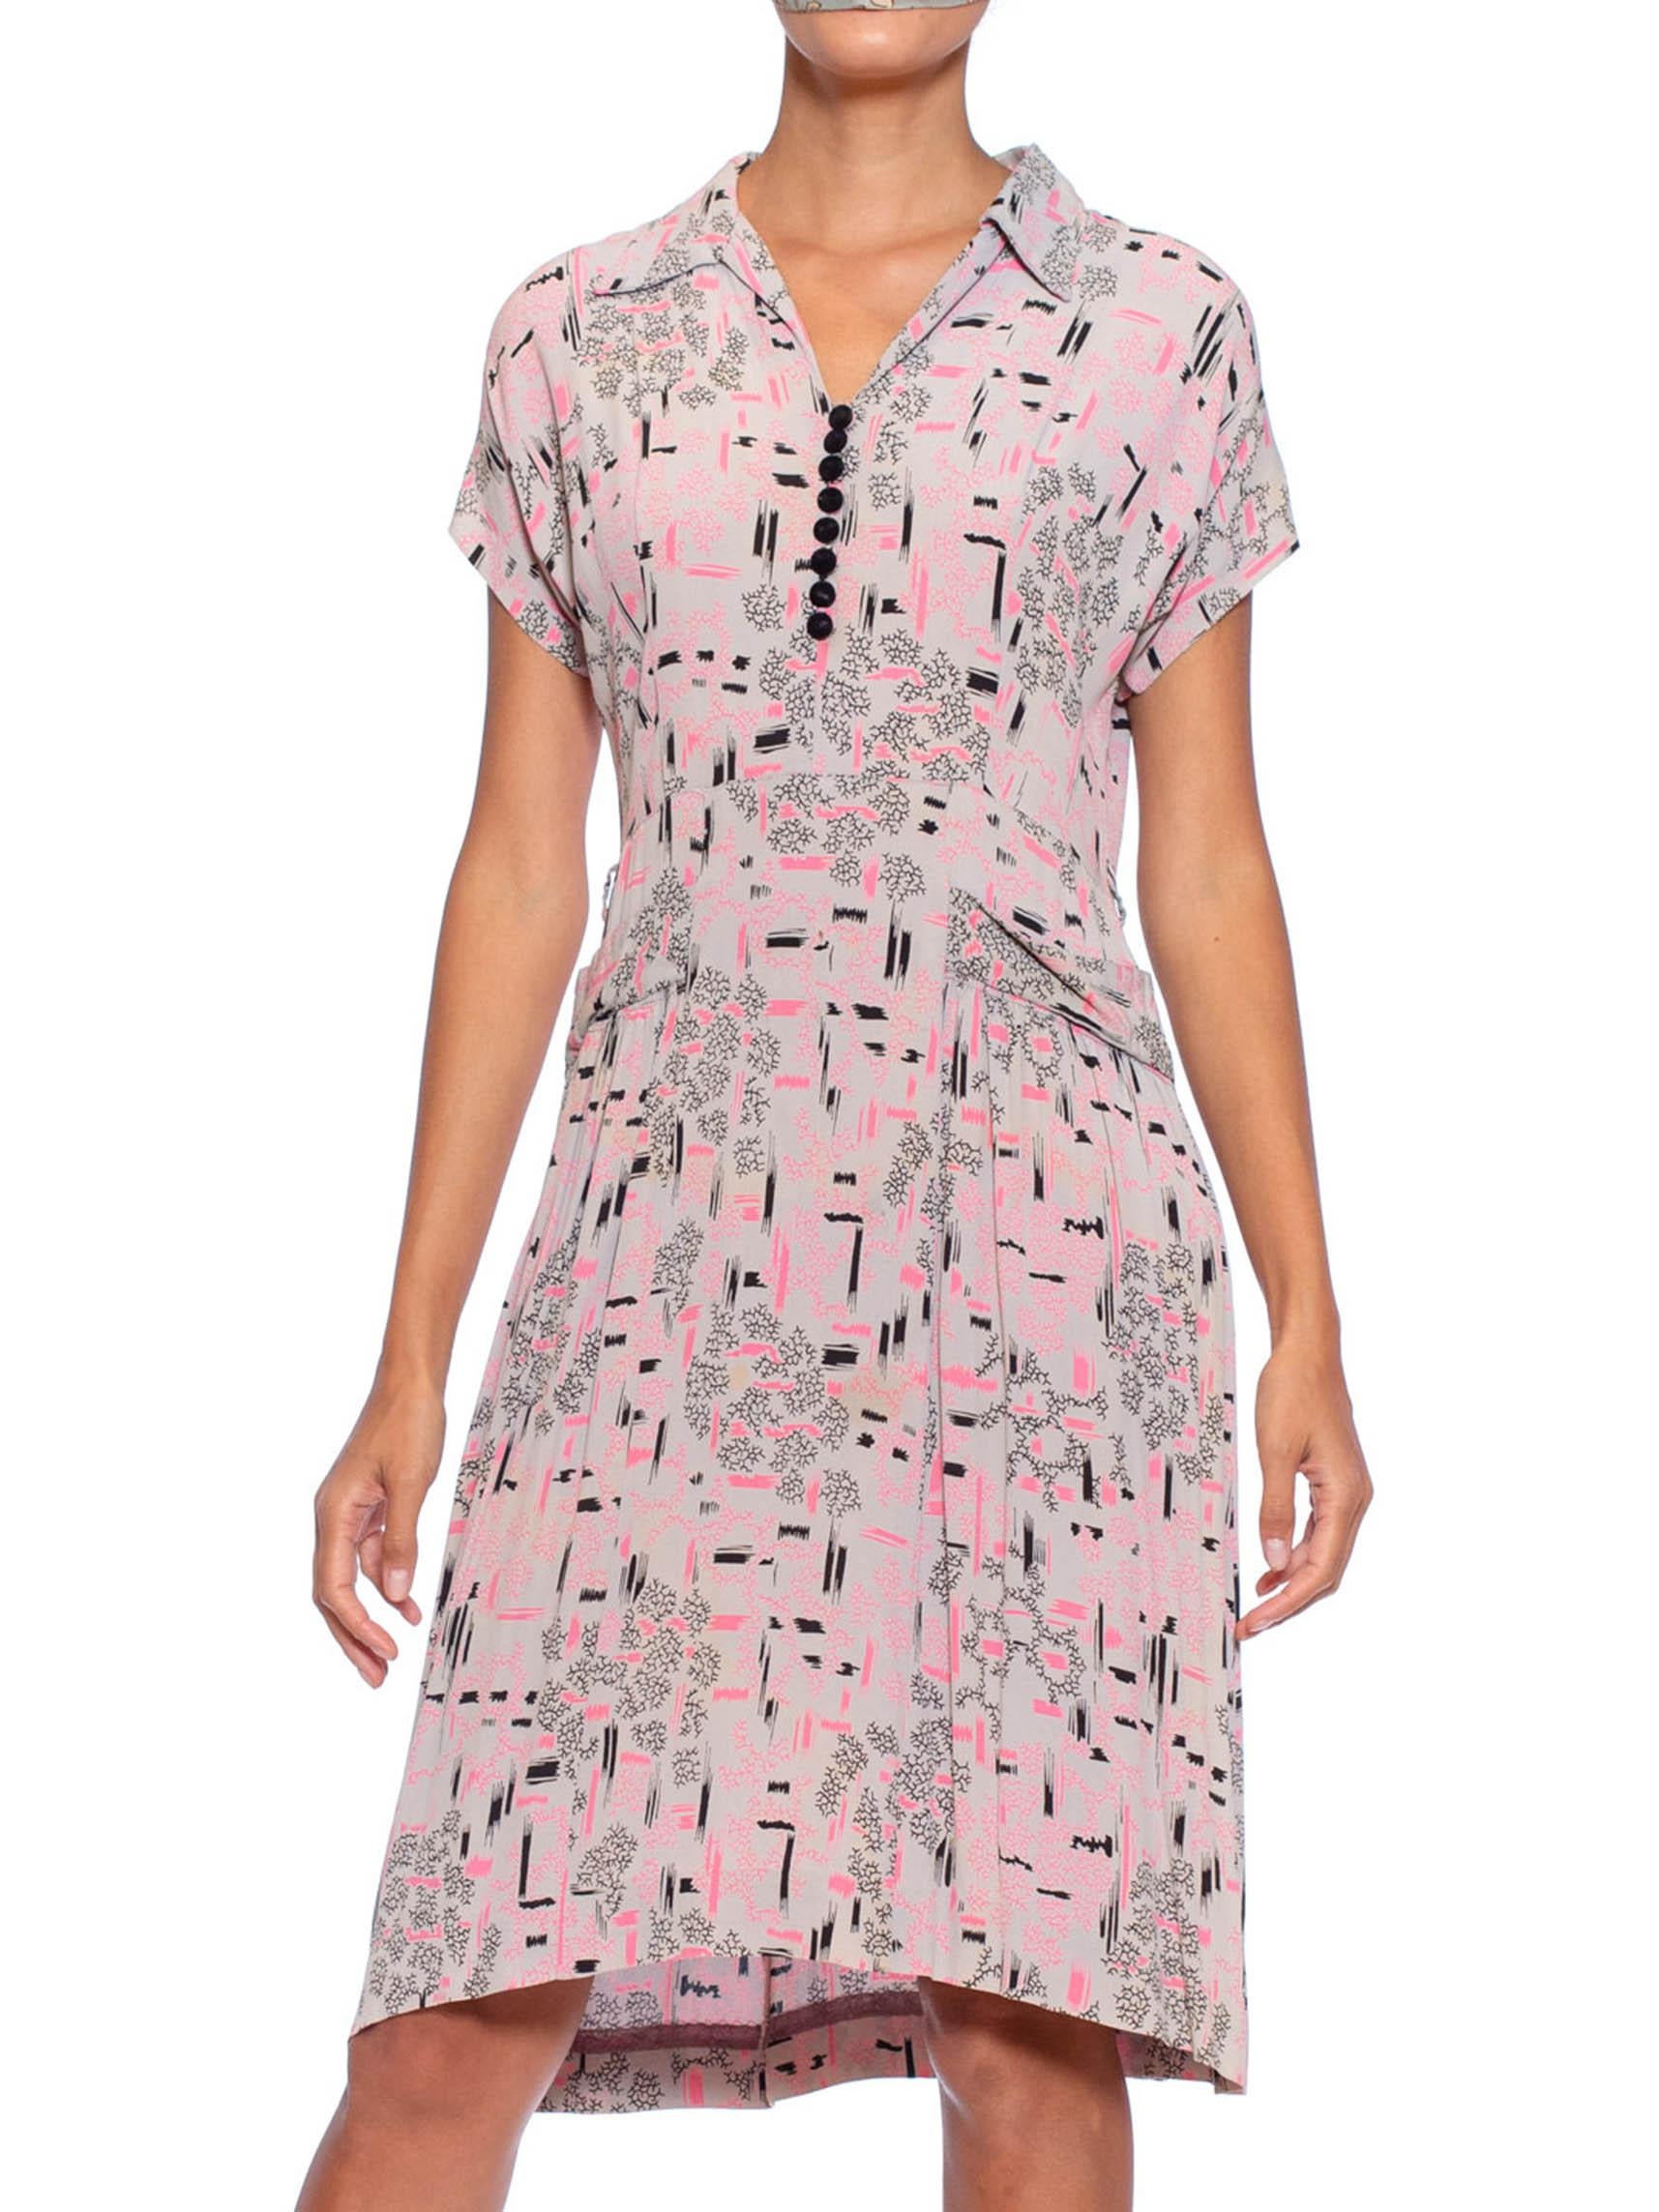 as-is some minor spots & stains 1940S Grey & Pink Rayon Crepe Atomic Print Dress 